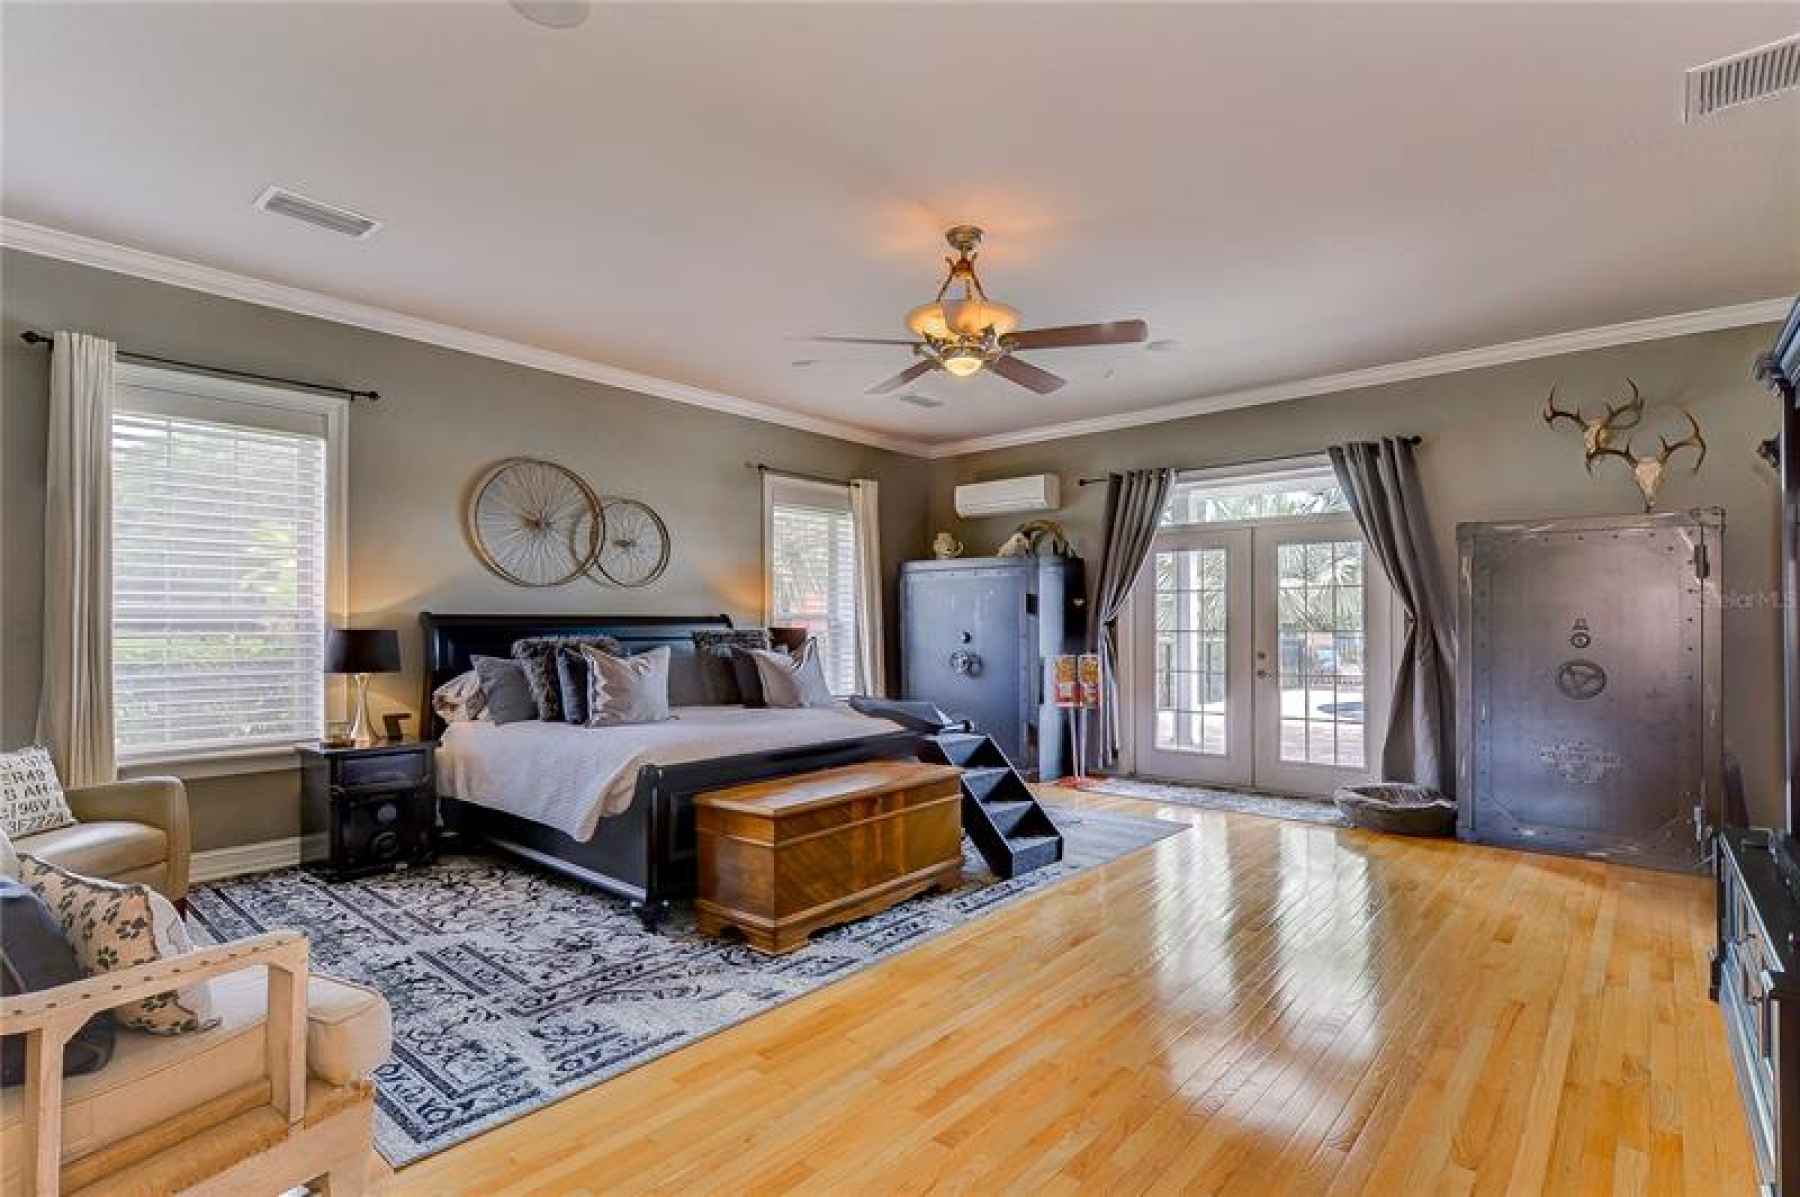 The breathtaking master suite is secluded on the first floor with impeccable views!